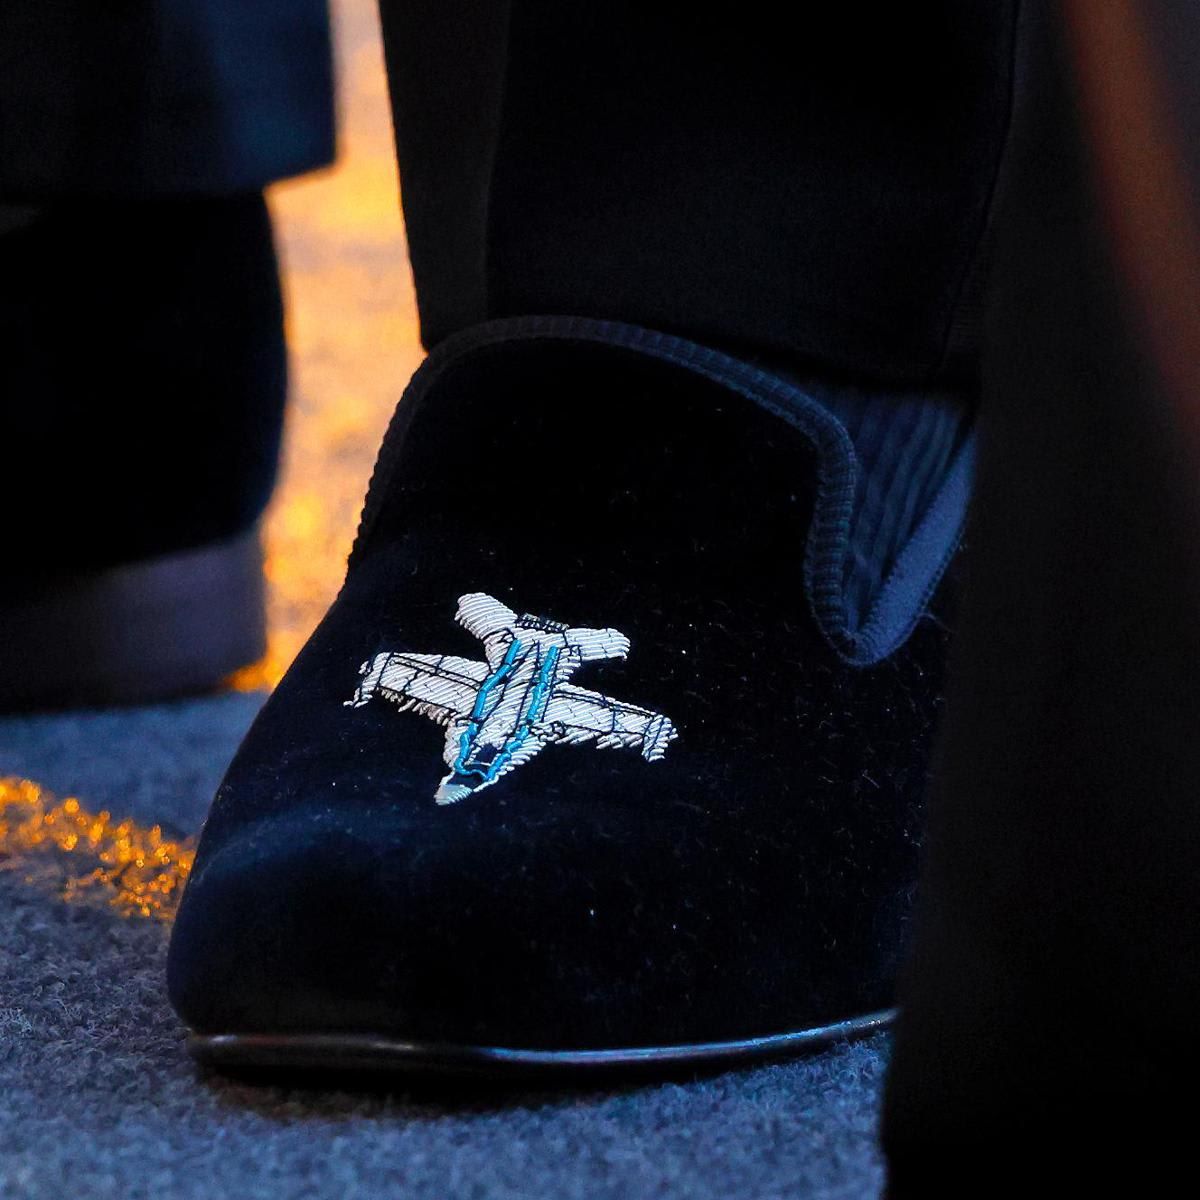 Prince William's shoes were embroidered with an aircraft